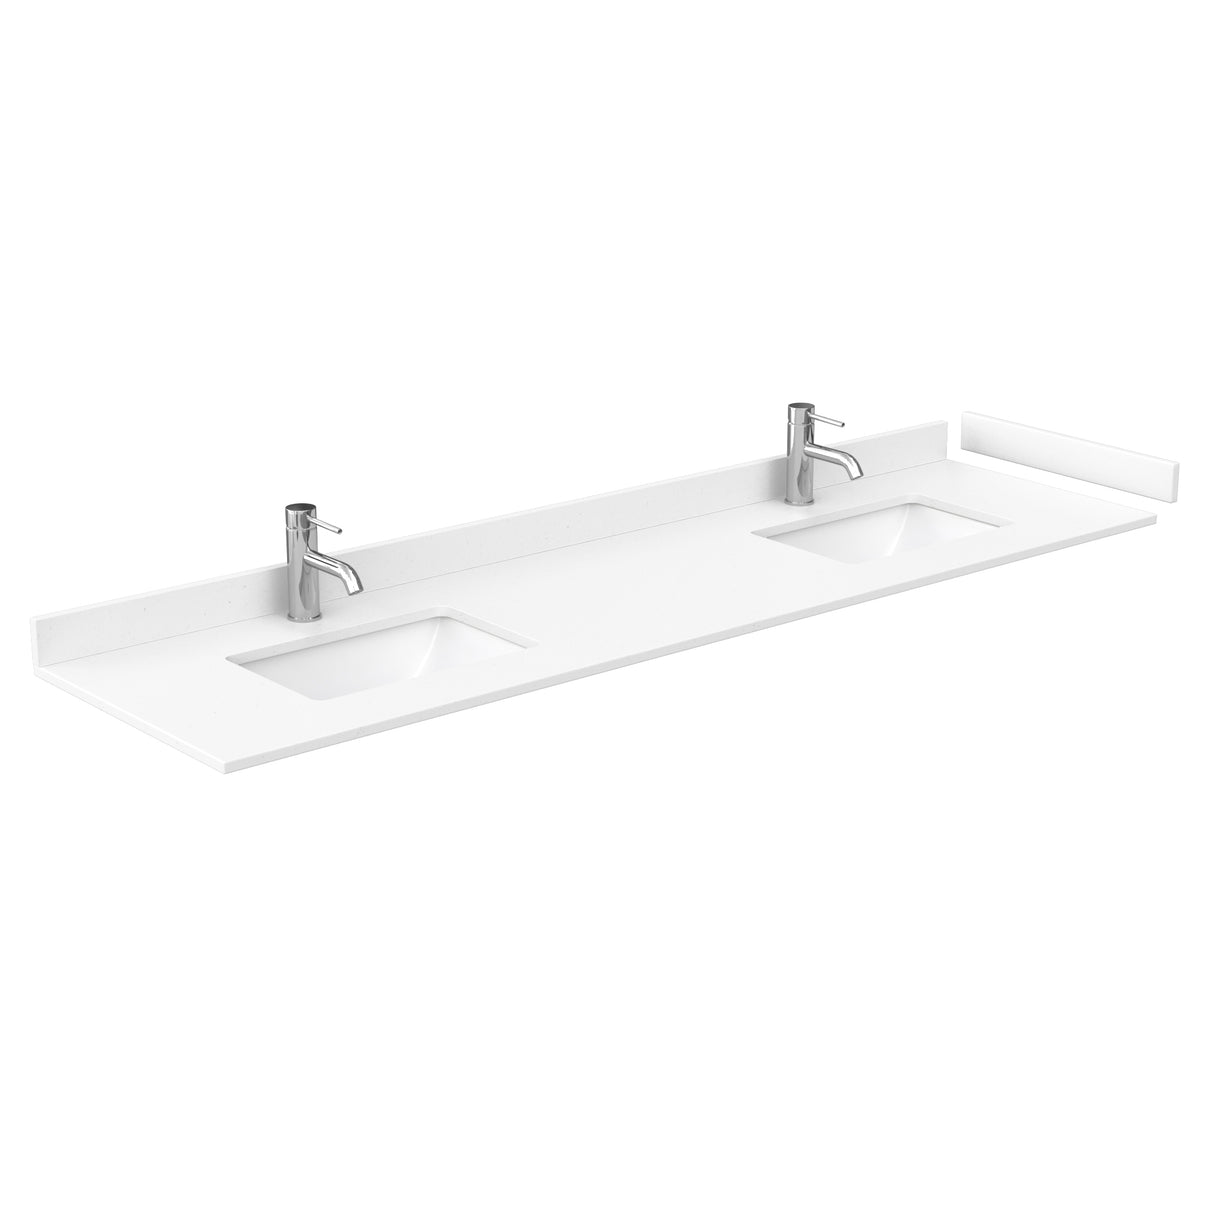 Deborah 80 Inch Double Bathroom Vanity in White White Cultured Marble Countertop Undermount Square Sinks 24 Inch Mirrors